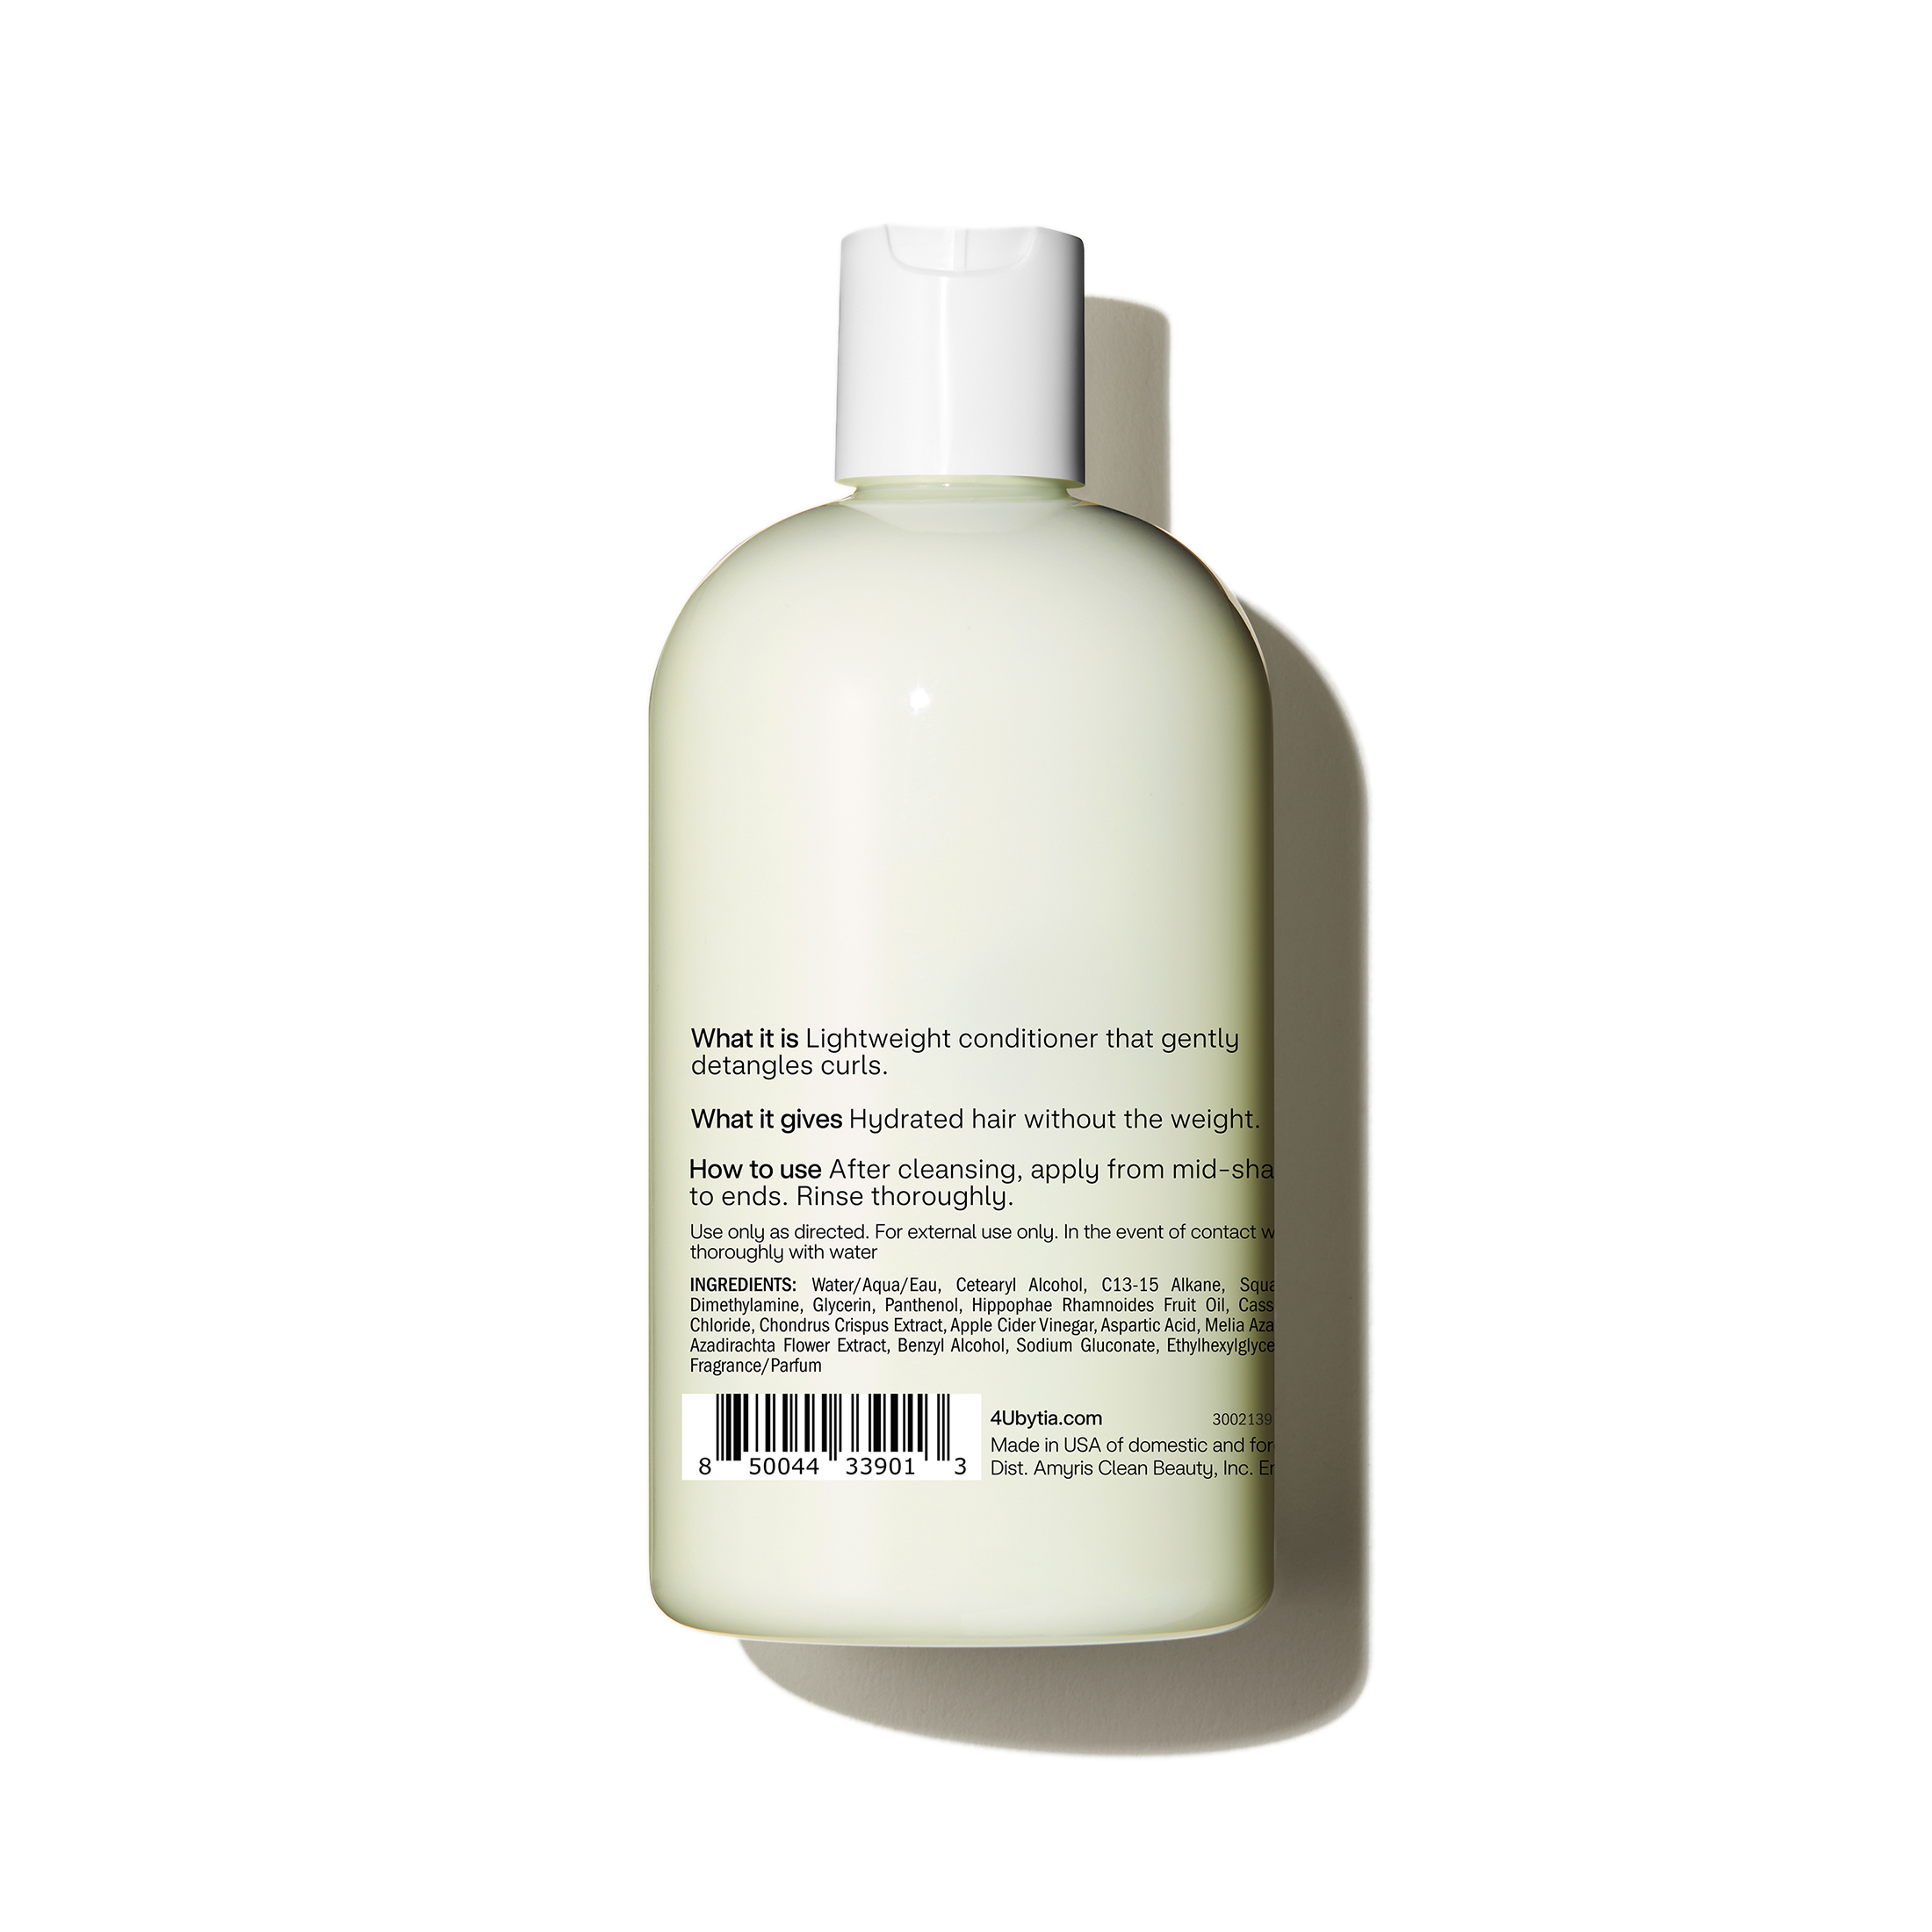 4U by Tia Lightweight Detangling Conditioner with Sea Moss and Hemi15, 13 fl oz - image 3 of 10